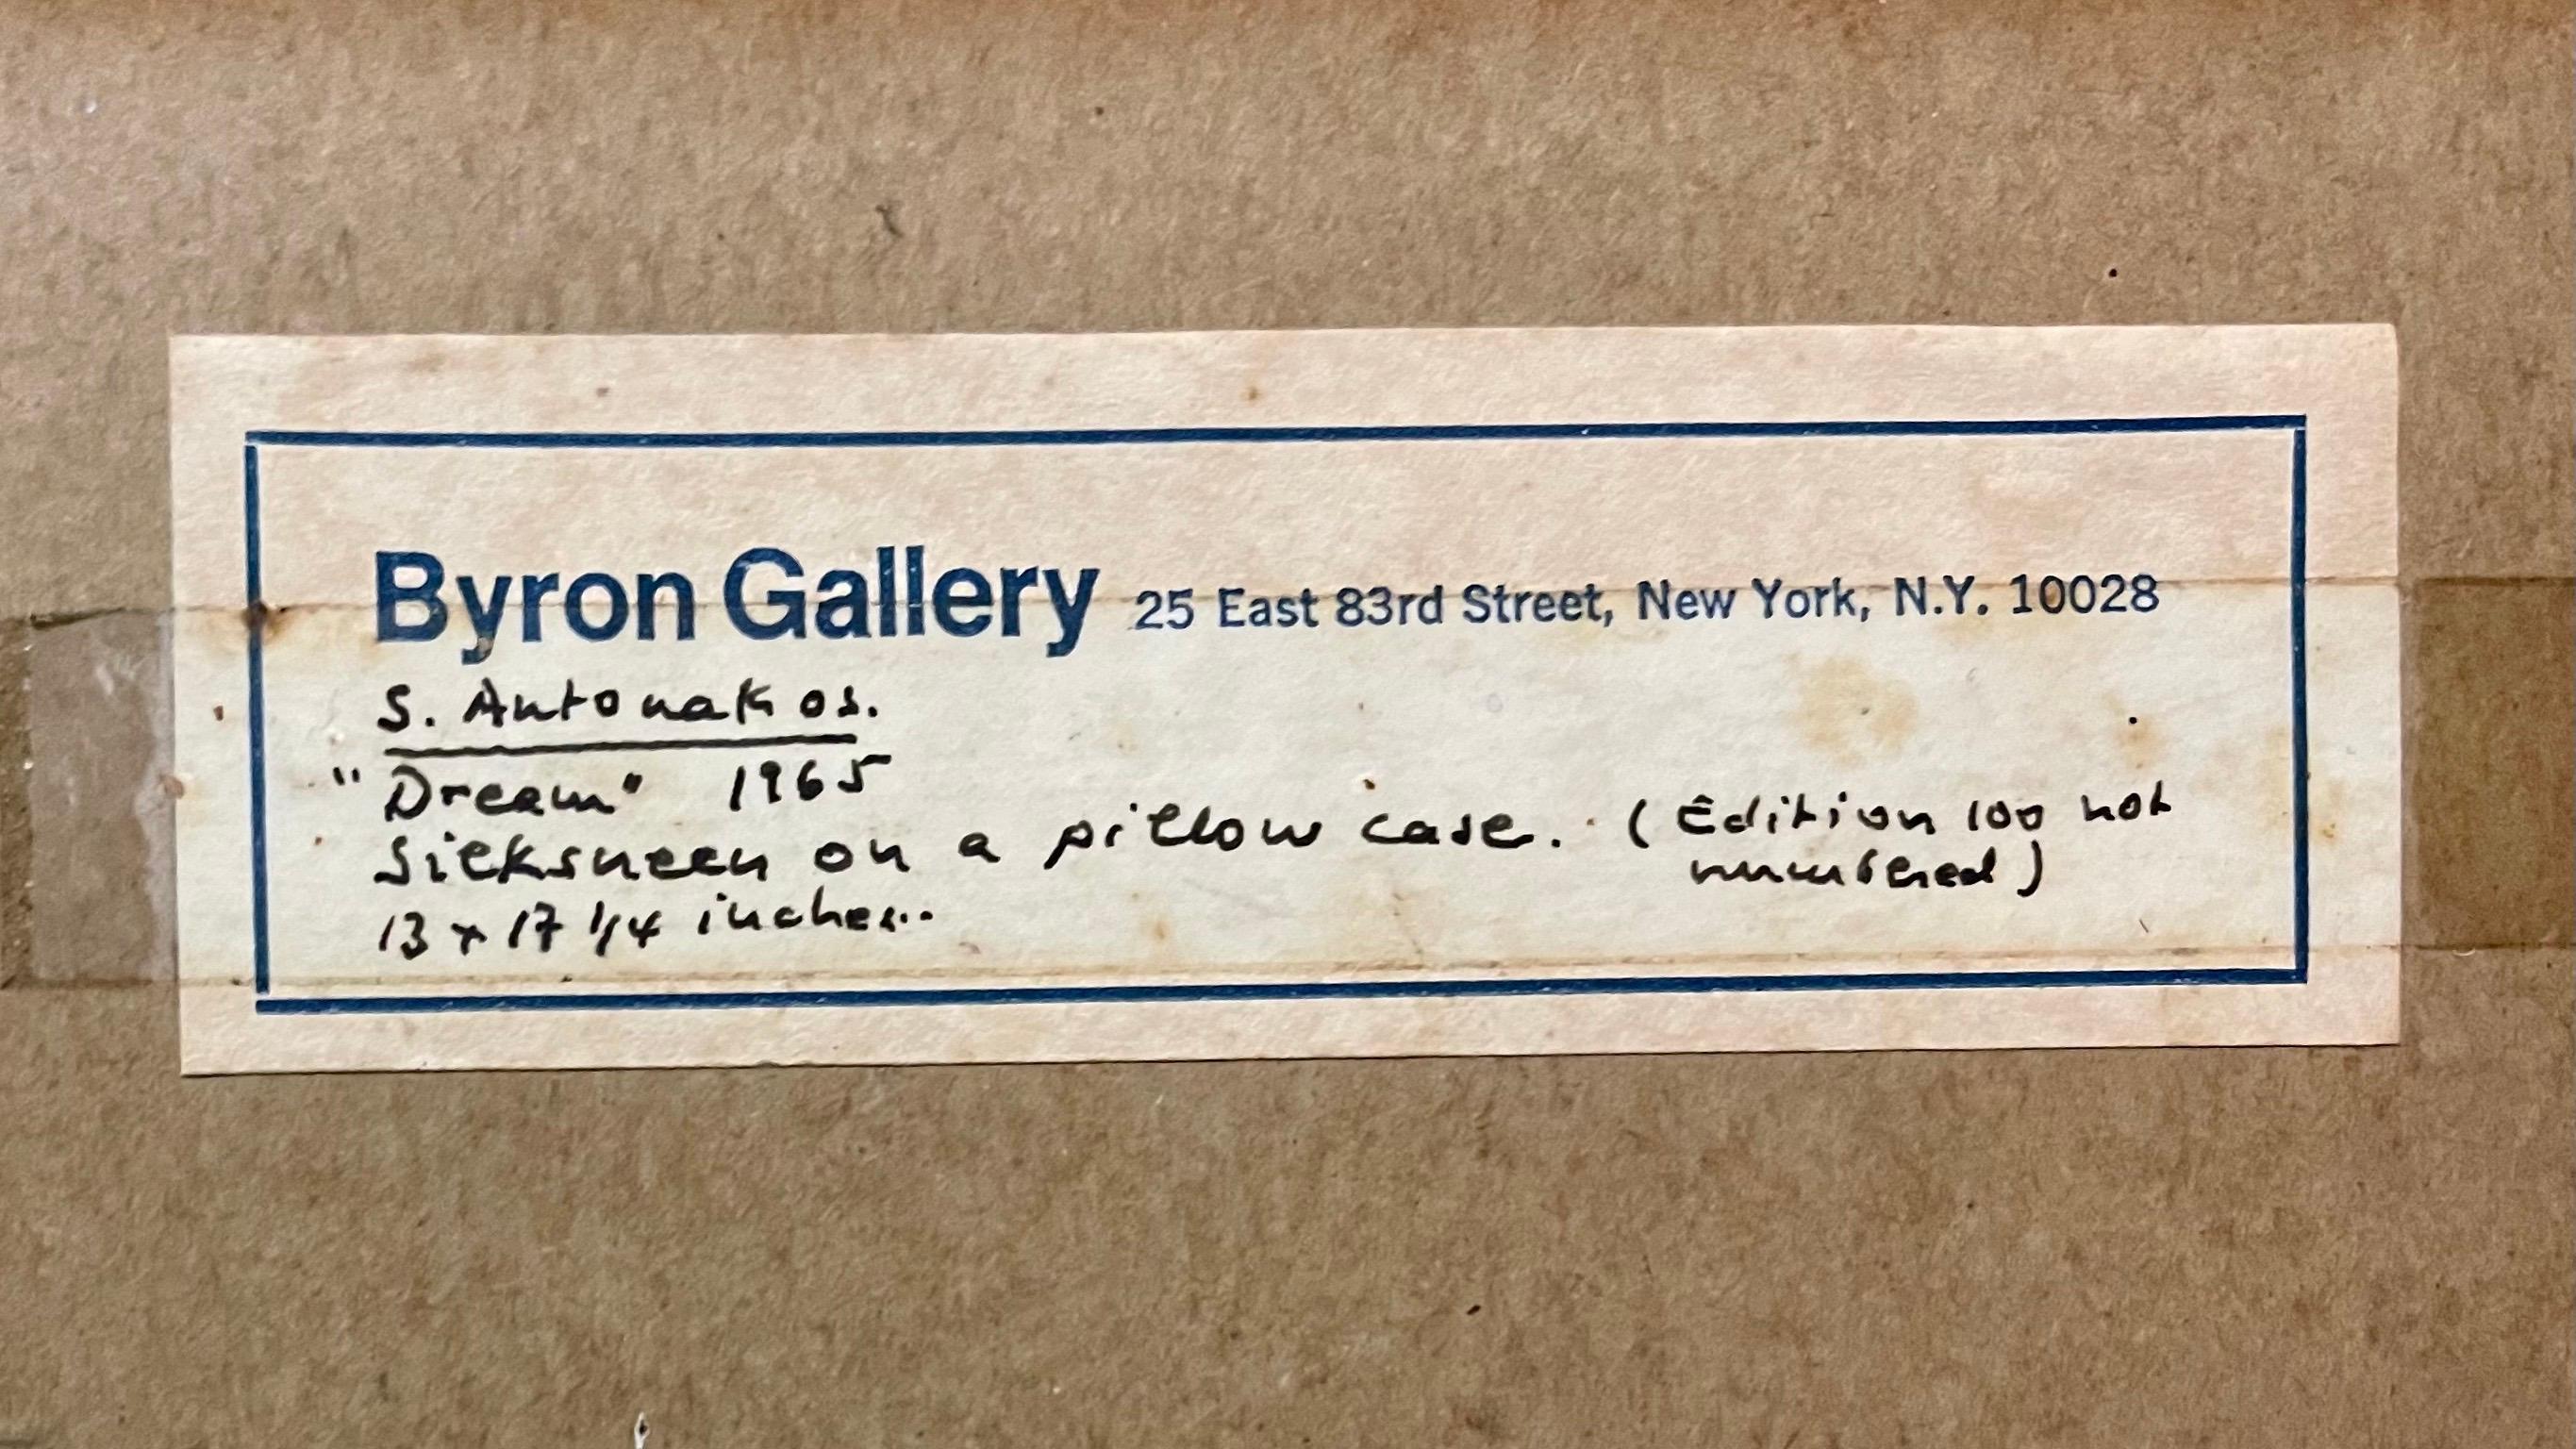 DREAM
New York City, USA
Provenance: Charles Byron Gallery, [1965]
Silkscreen on linen pillowcase 
Hand signed. this is not numbered. (it says on gallery label verso edition of 100, I do not know how many were actually made)

This is from an